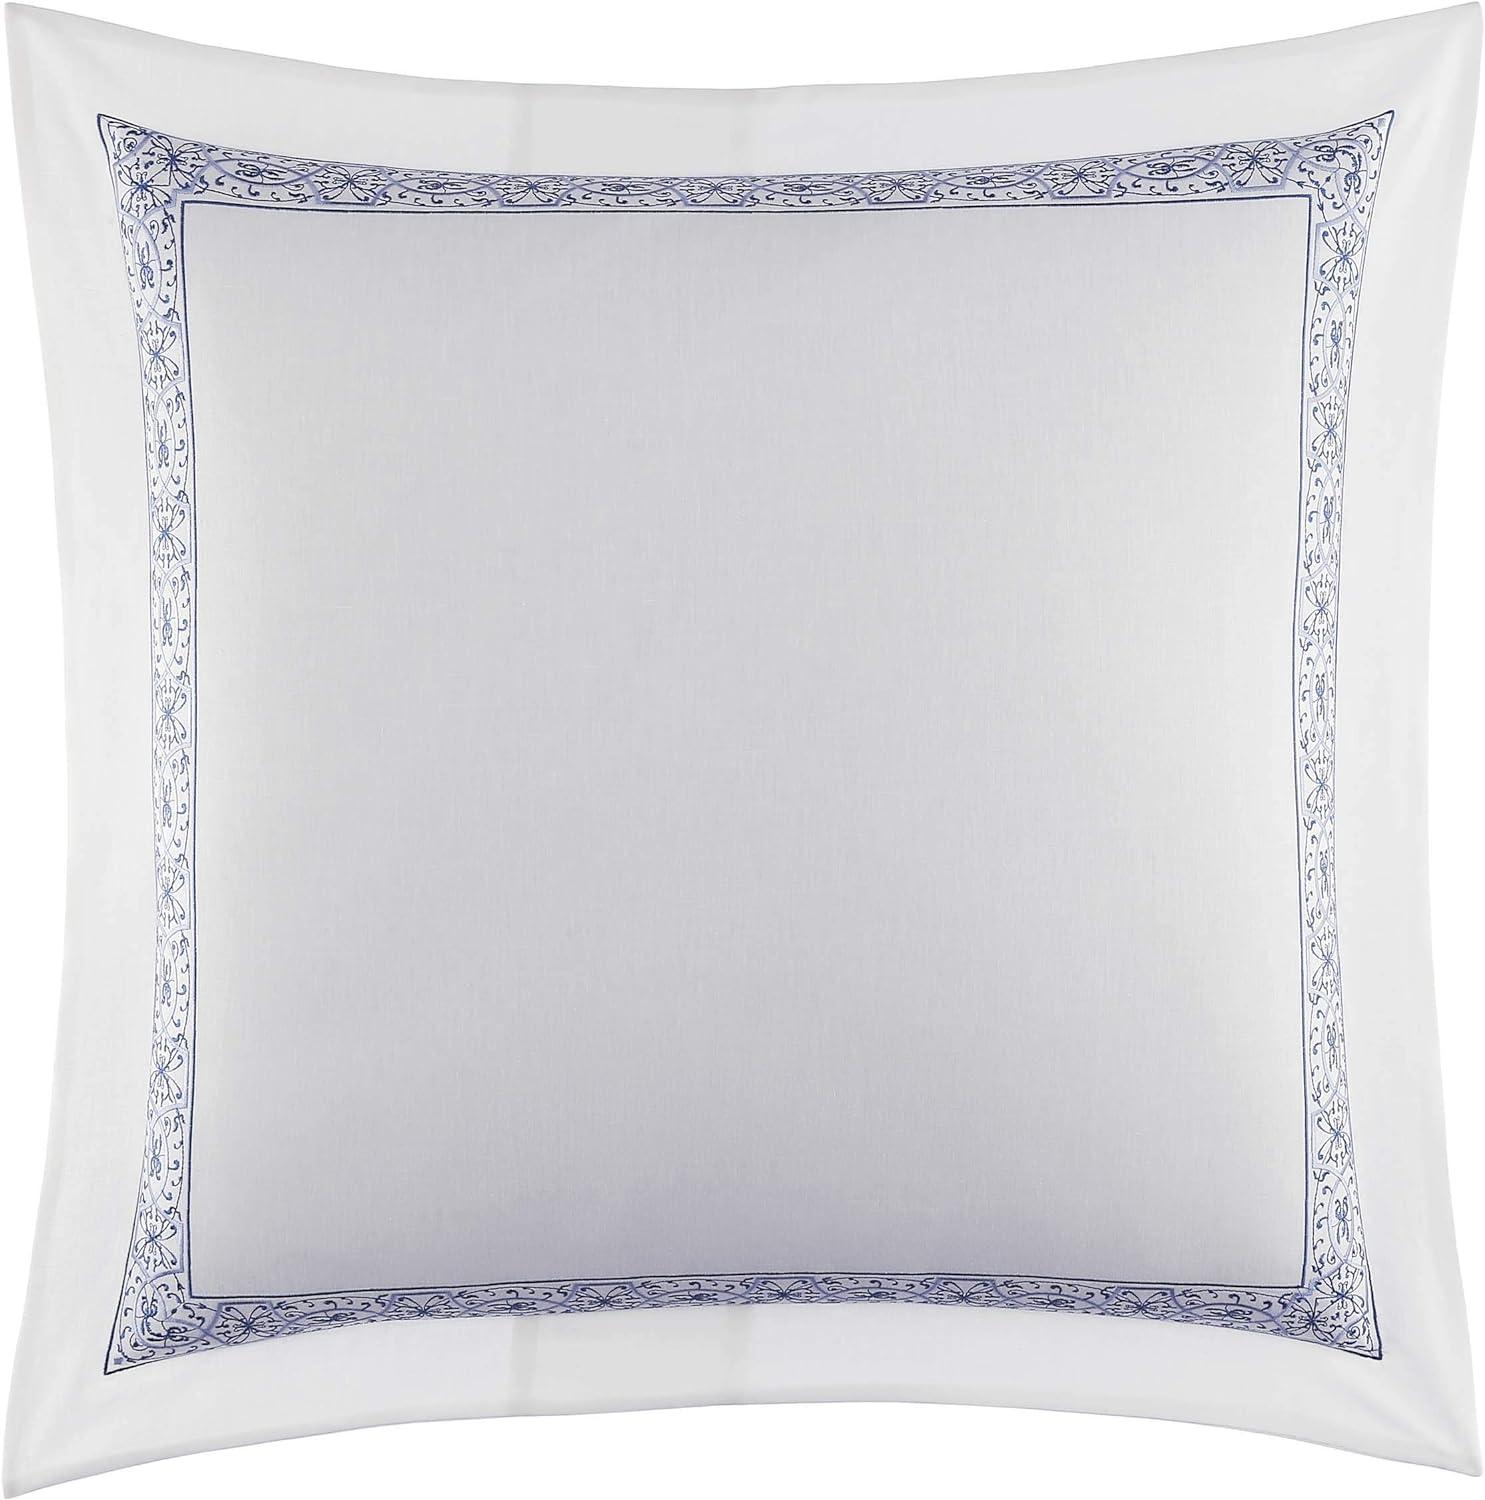 Luxurious Blue and White Embroidered Cotton Euro Sham